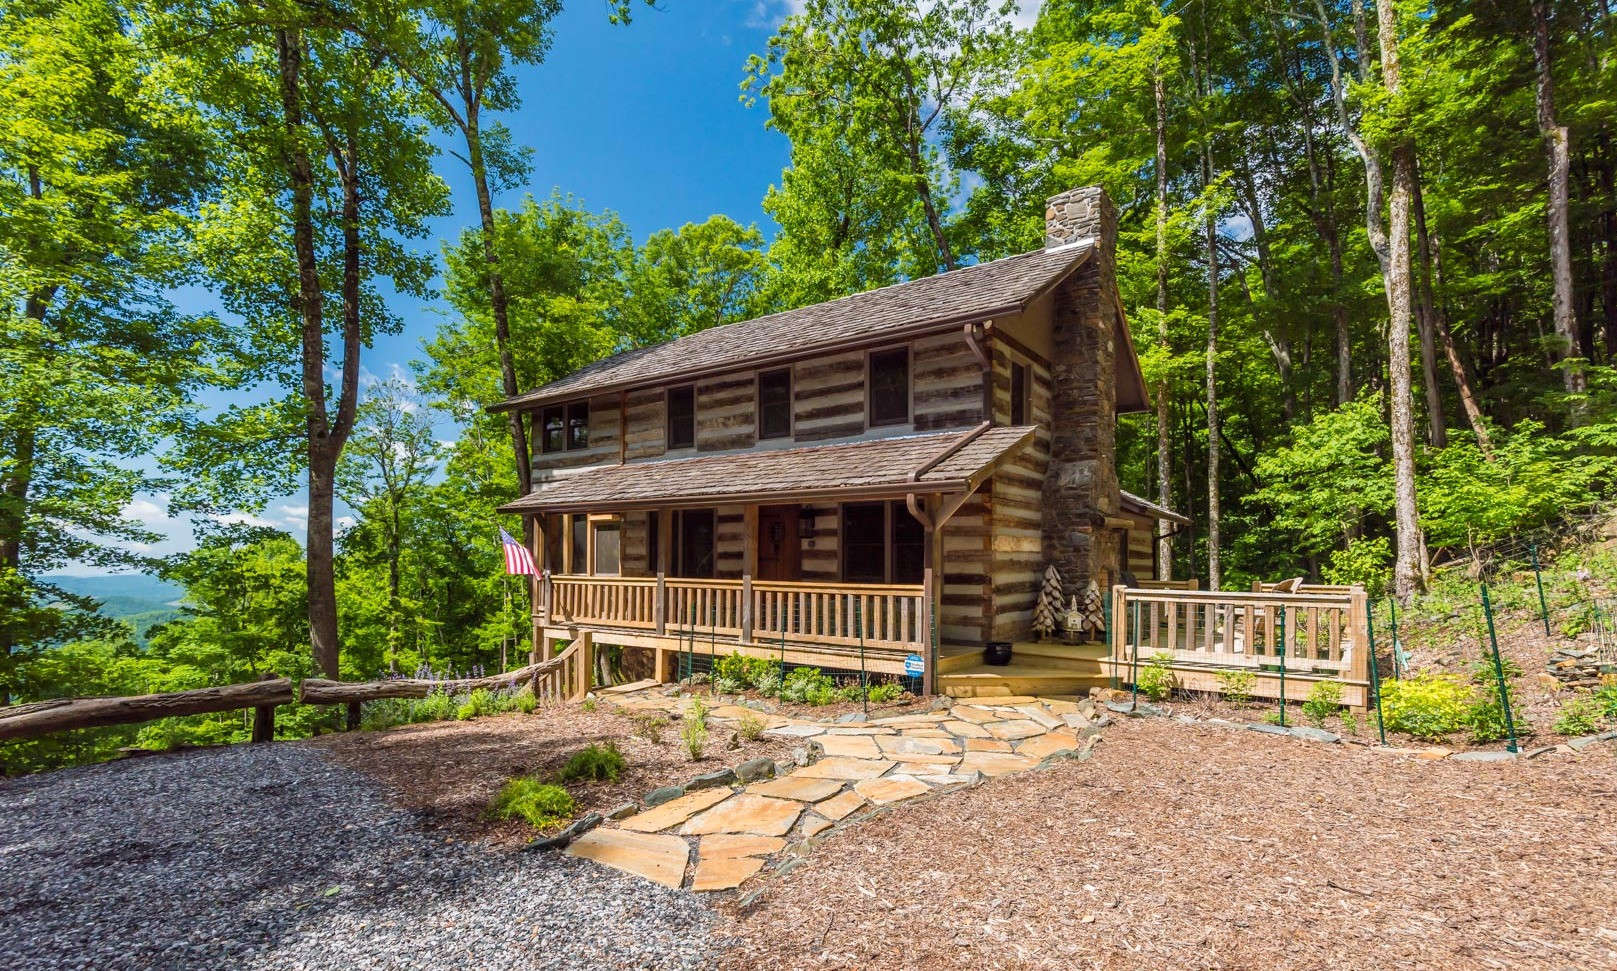 This beautifully appointed Stonebridge cabin with many upgrades, an incredible long-range view, plus end of the road privacy is nestled among a private 6.85 estate sized setting in a highly sought after log cabin community in the Todd area of Southern Ashe County.